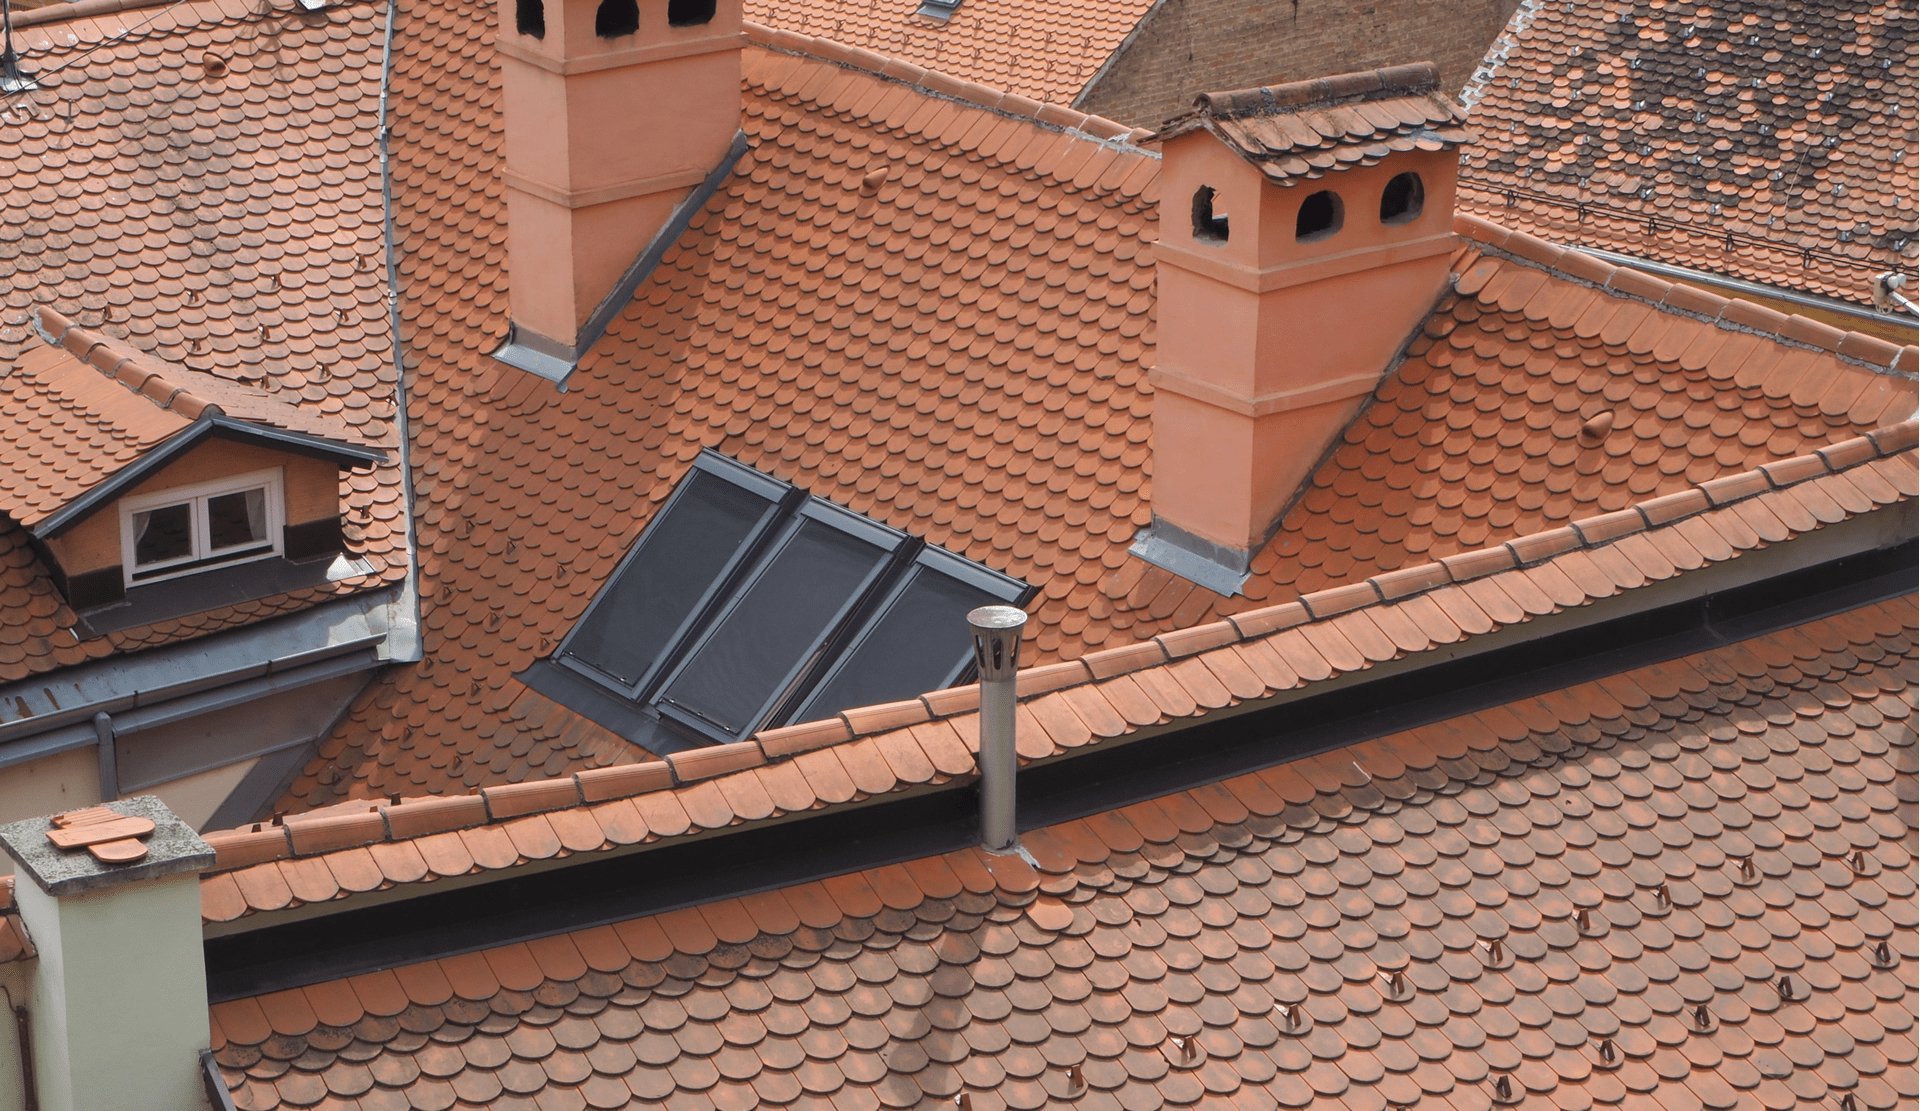 Why Would You Want To Replace Your Roof With Tile?